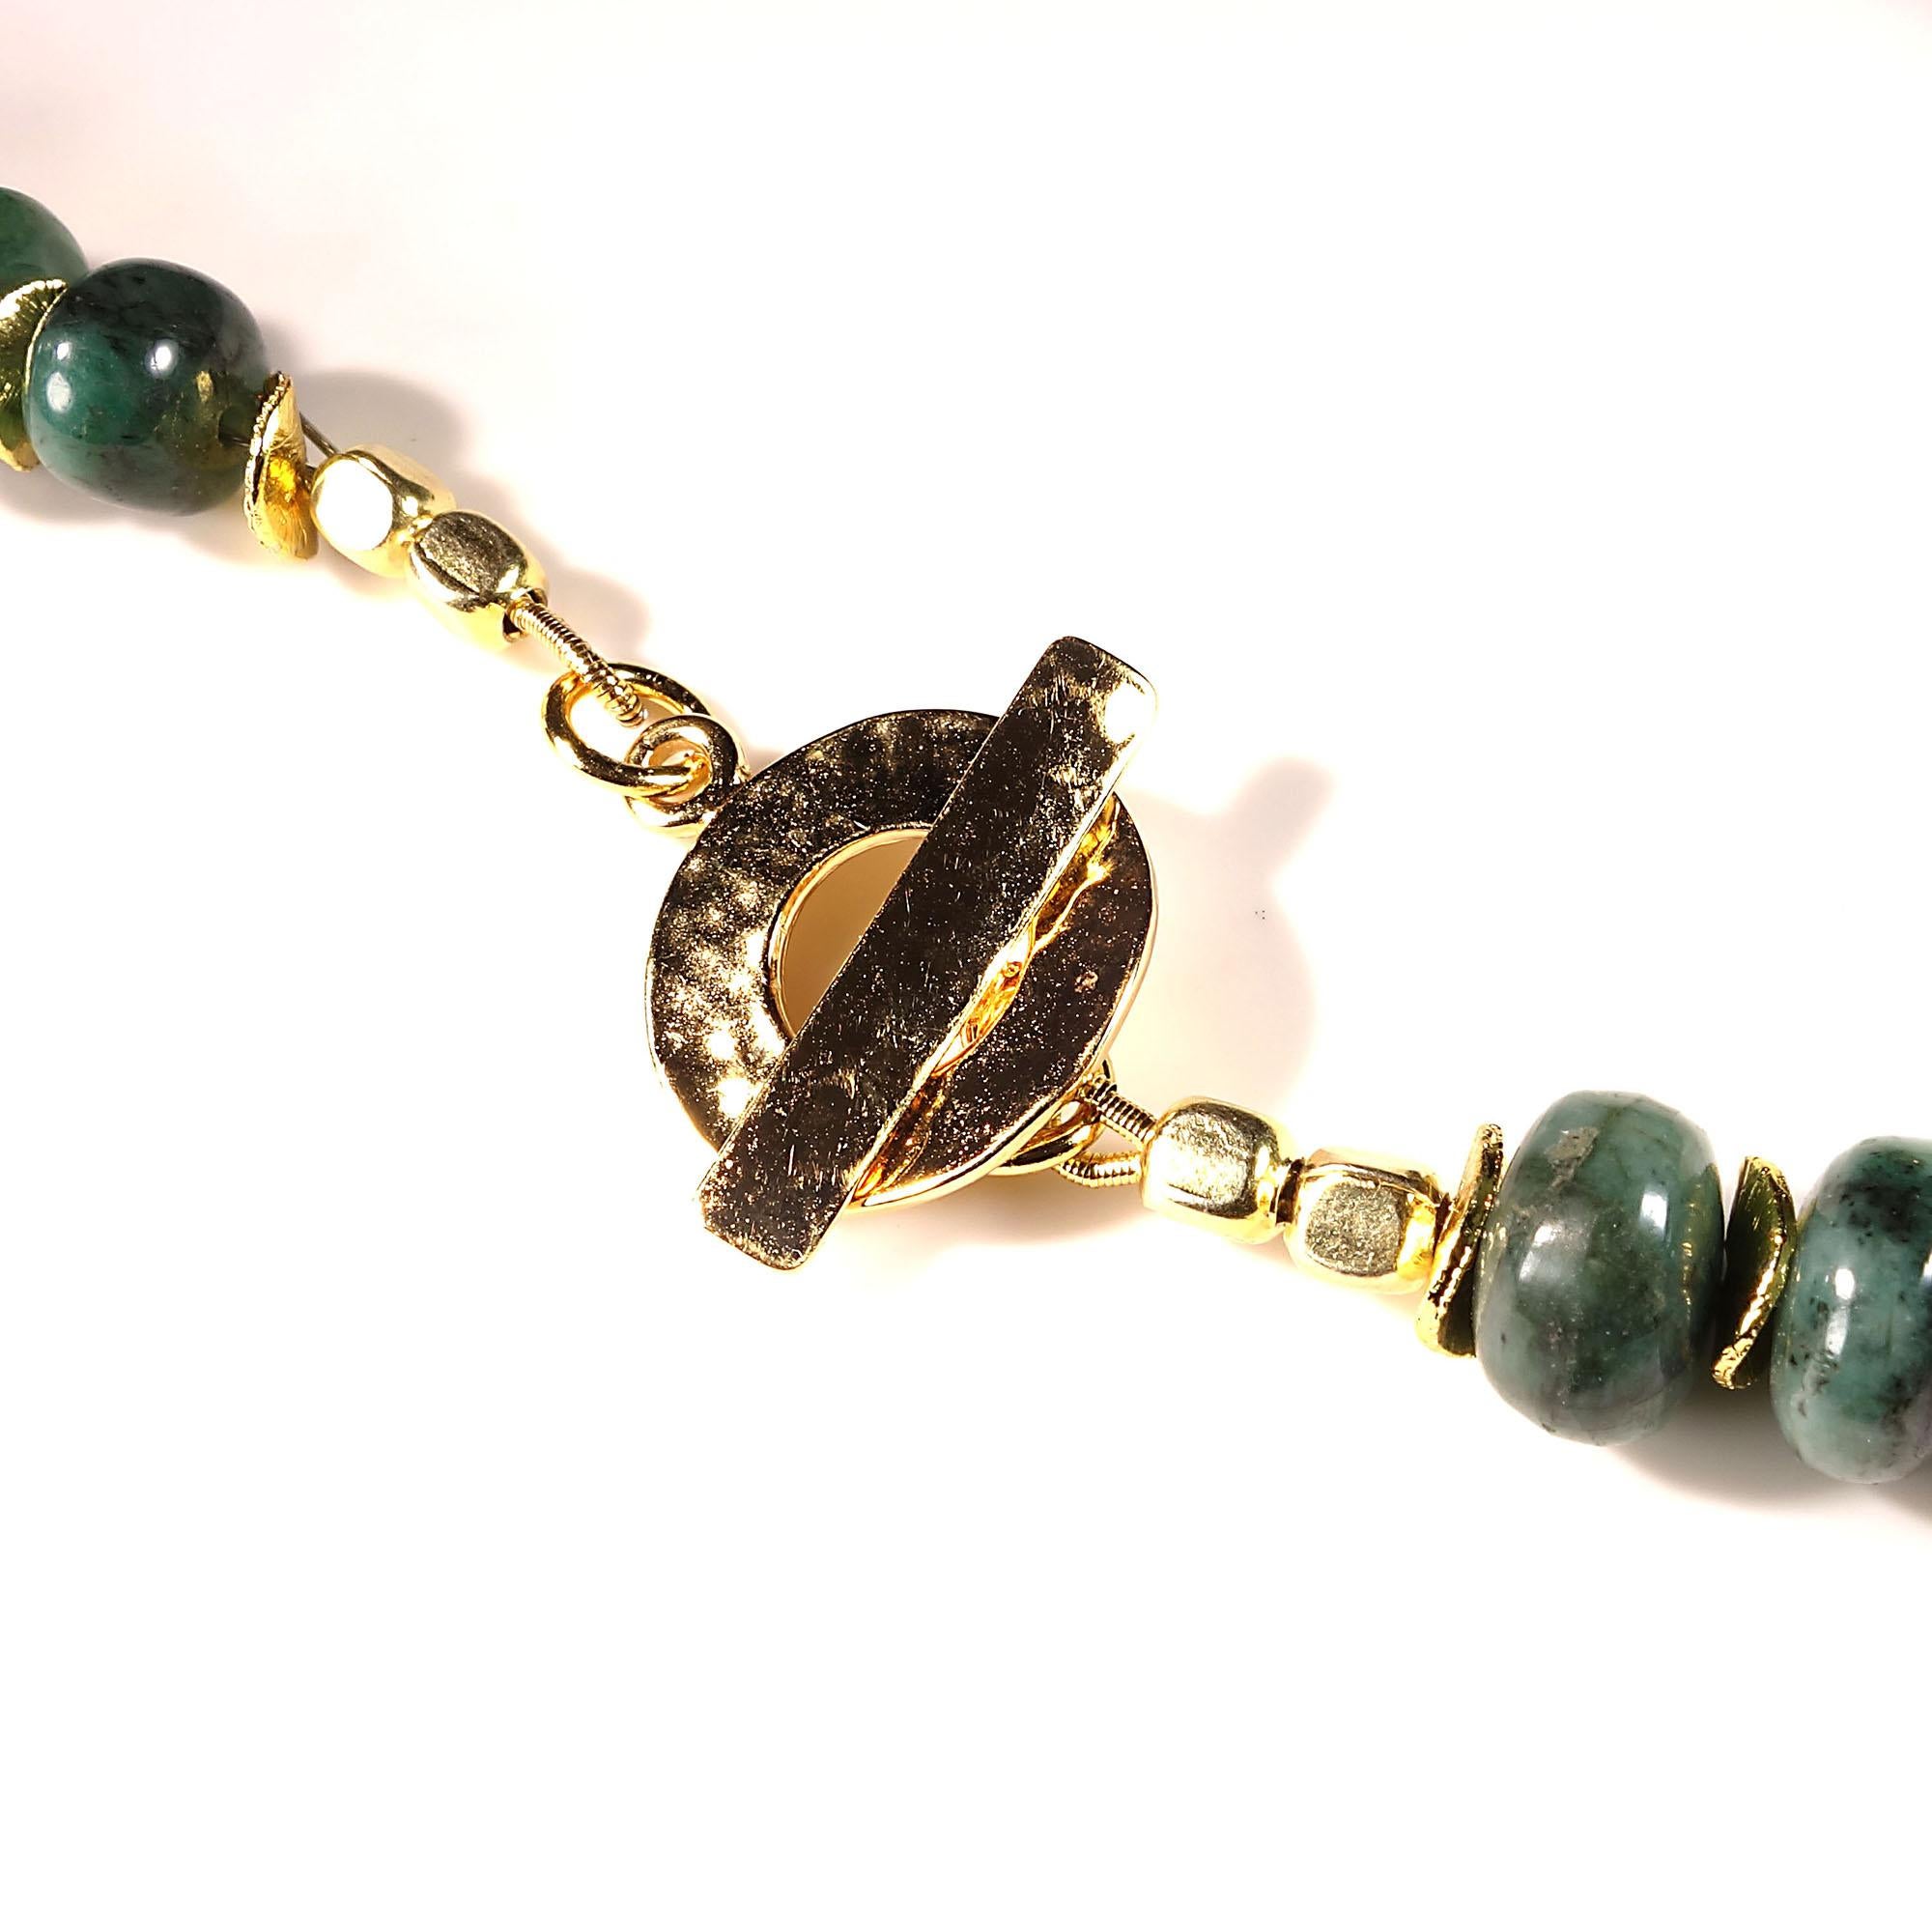 Graduated Emerald Rondel Choker Necklace with Gold Vermeil Clasp 1